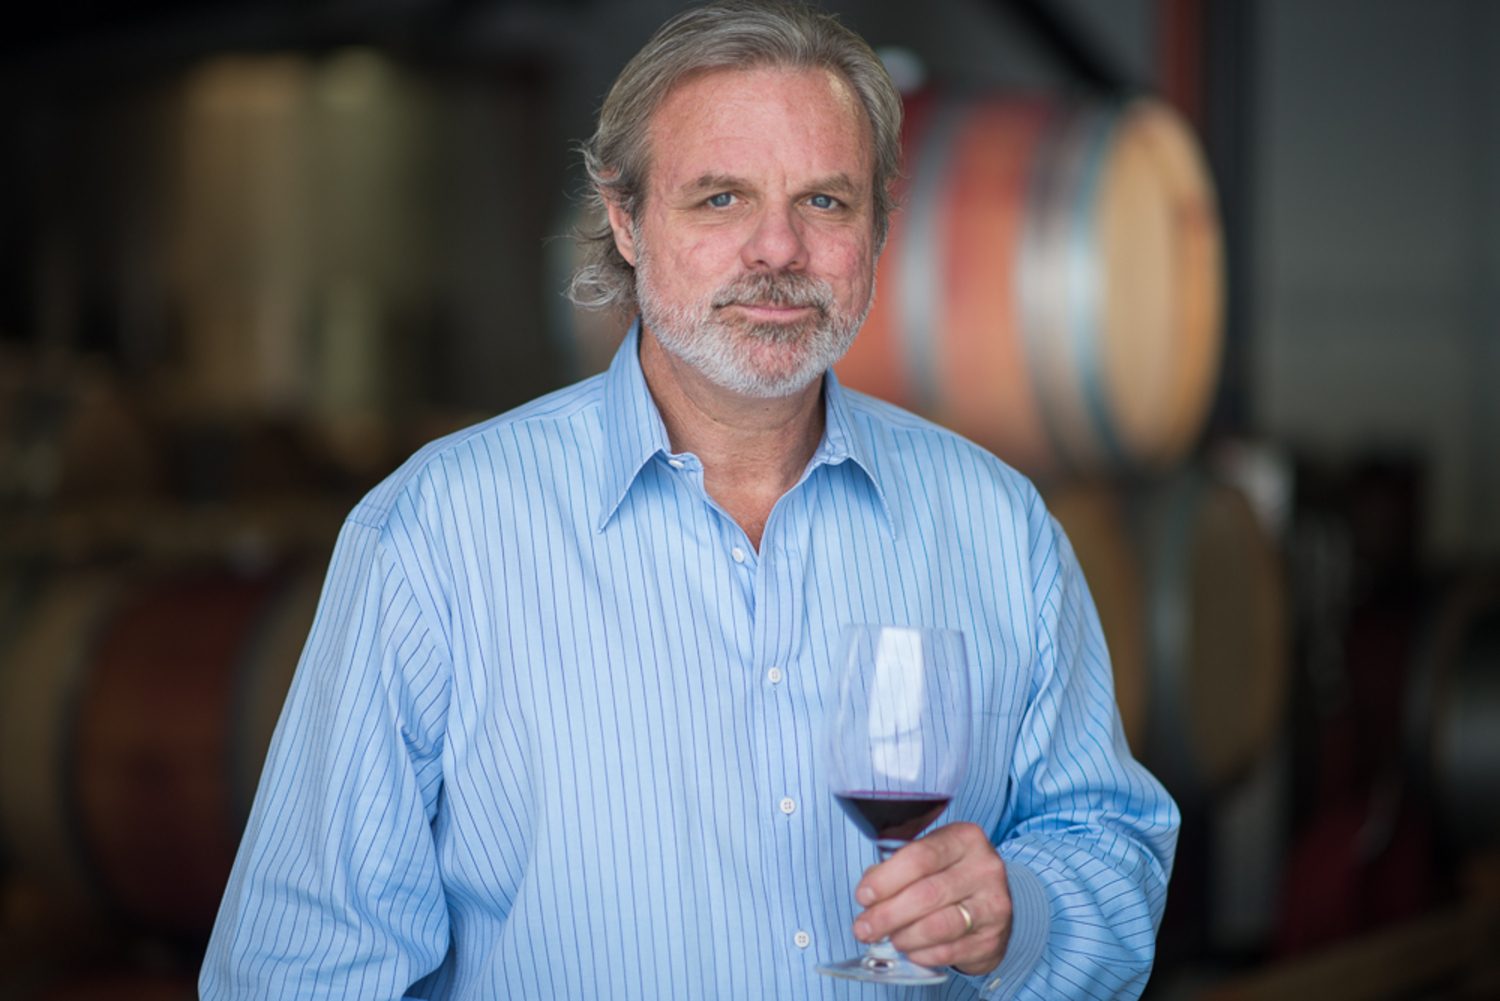 Winemaker Richard Olsen-Harbich will speak about his book “Sun, Sea, Soil, Wine” in a talk at the John Jermain Memorial Library on March 2.